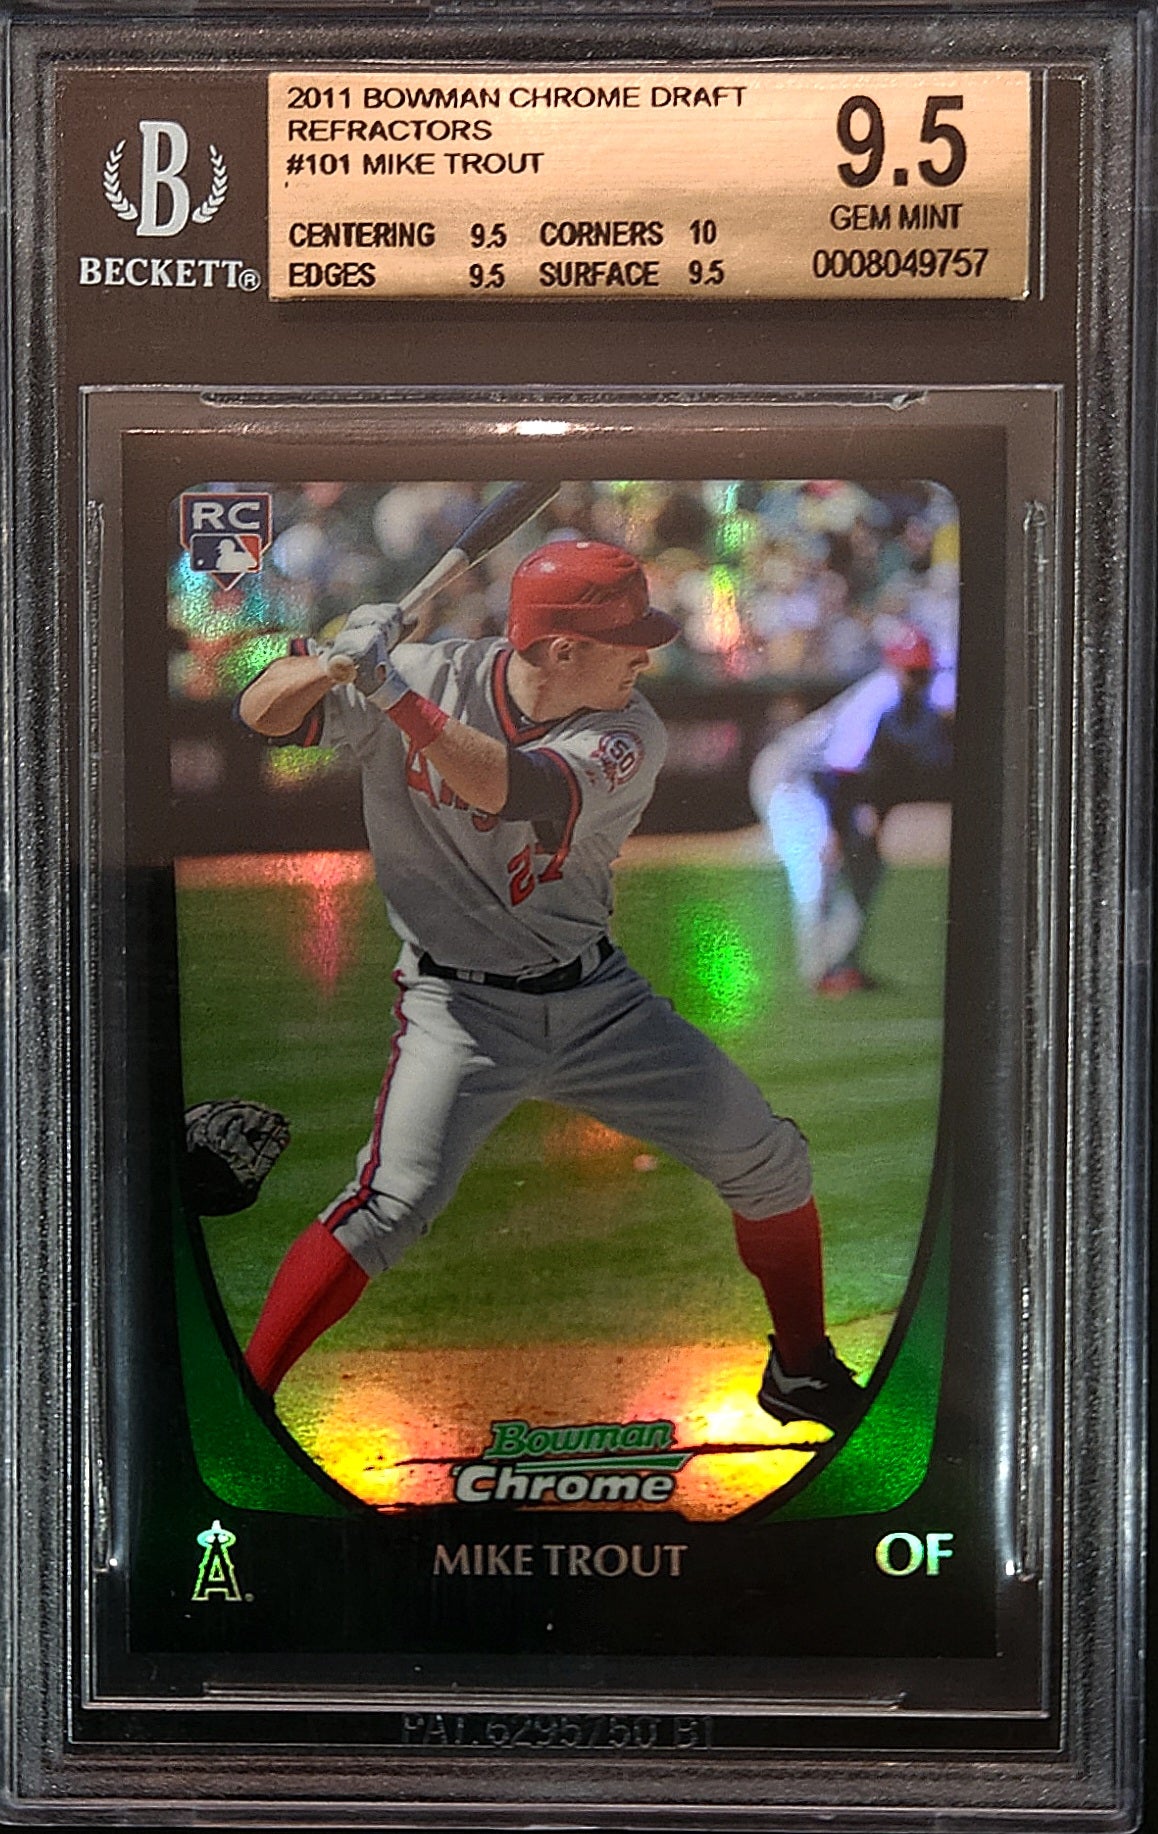 2011 Bowman Chrome Draft #101 Mike Trout Refractor Rookie (Angels 